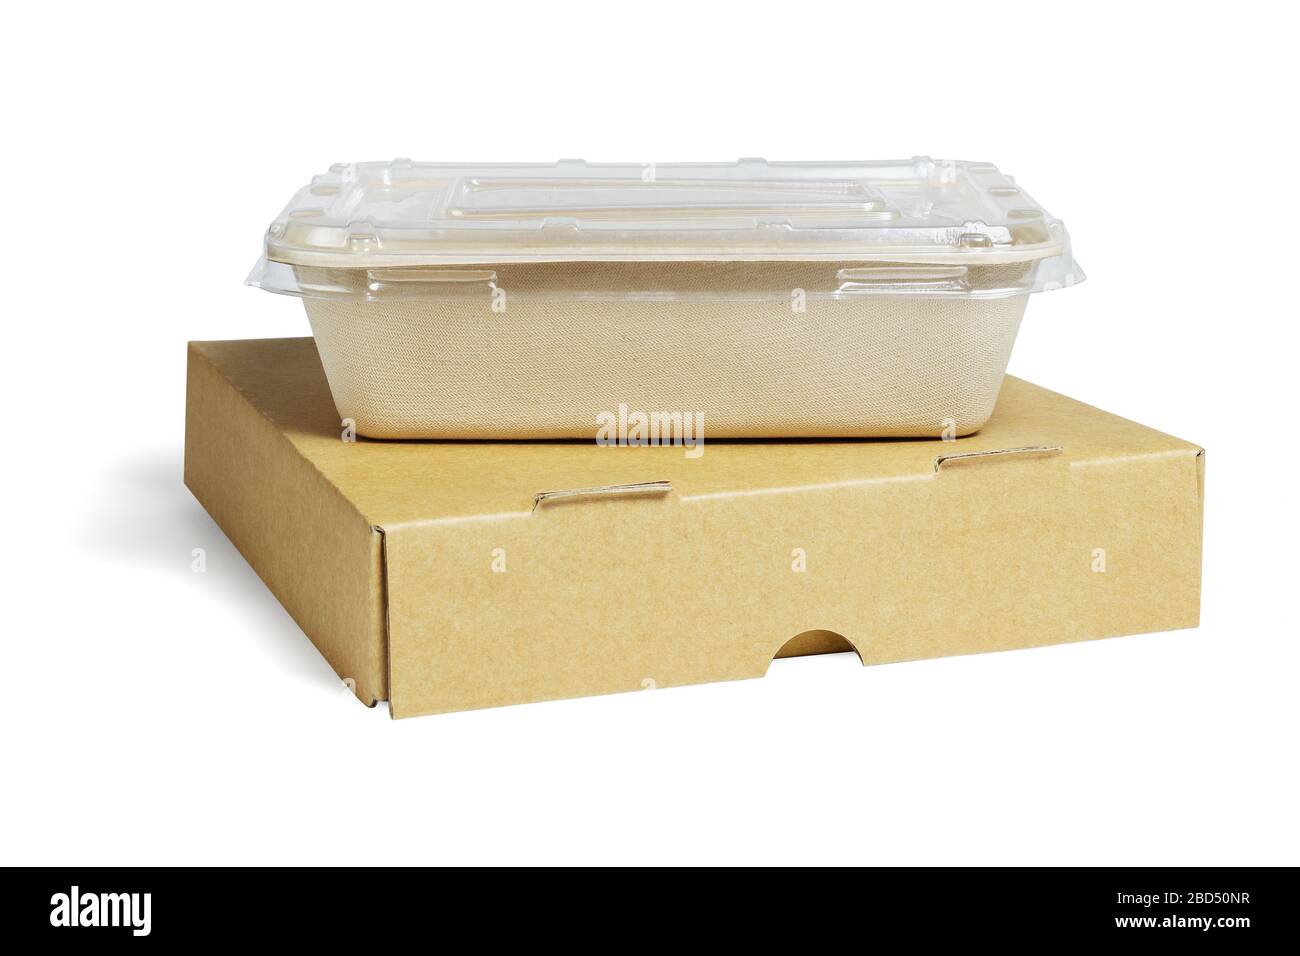 https://c8.alamy.com/comp/2BD50NR/takeaway-food-containers-on-white-background-2BD50NR.jpg